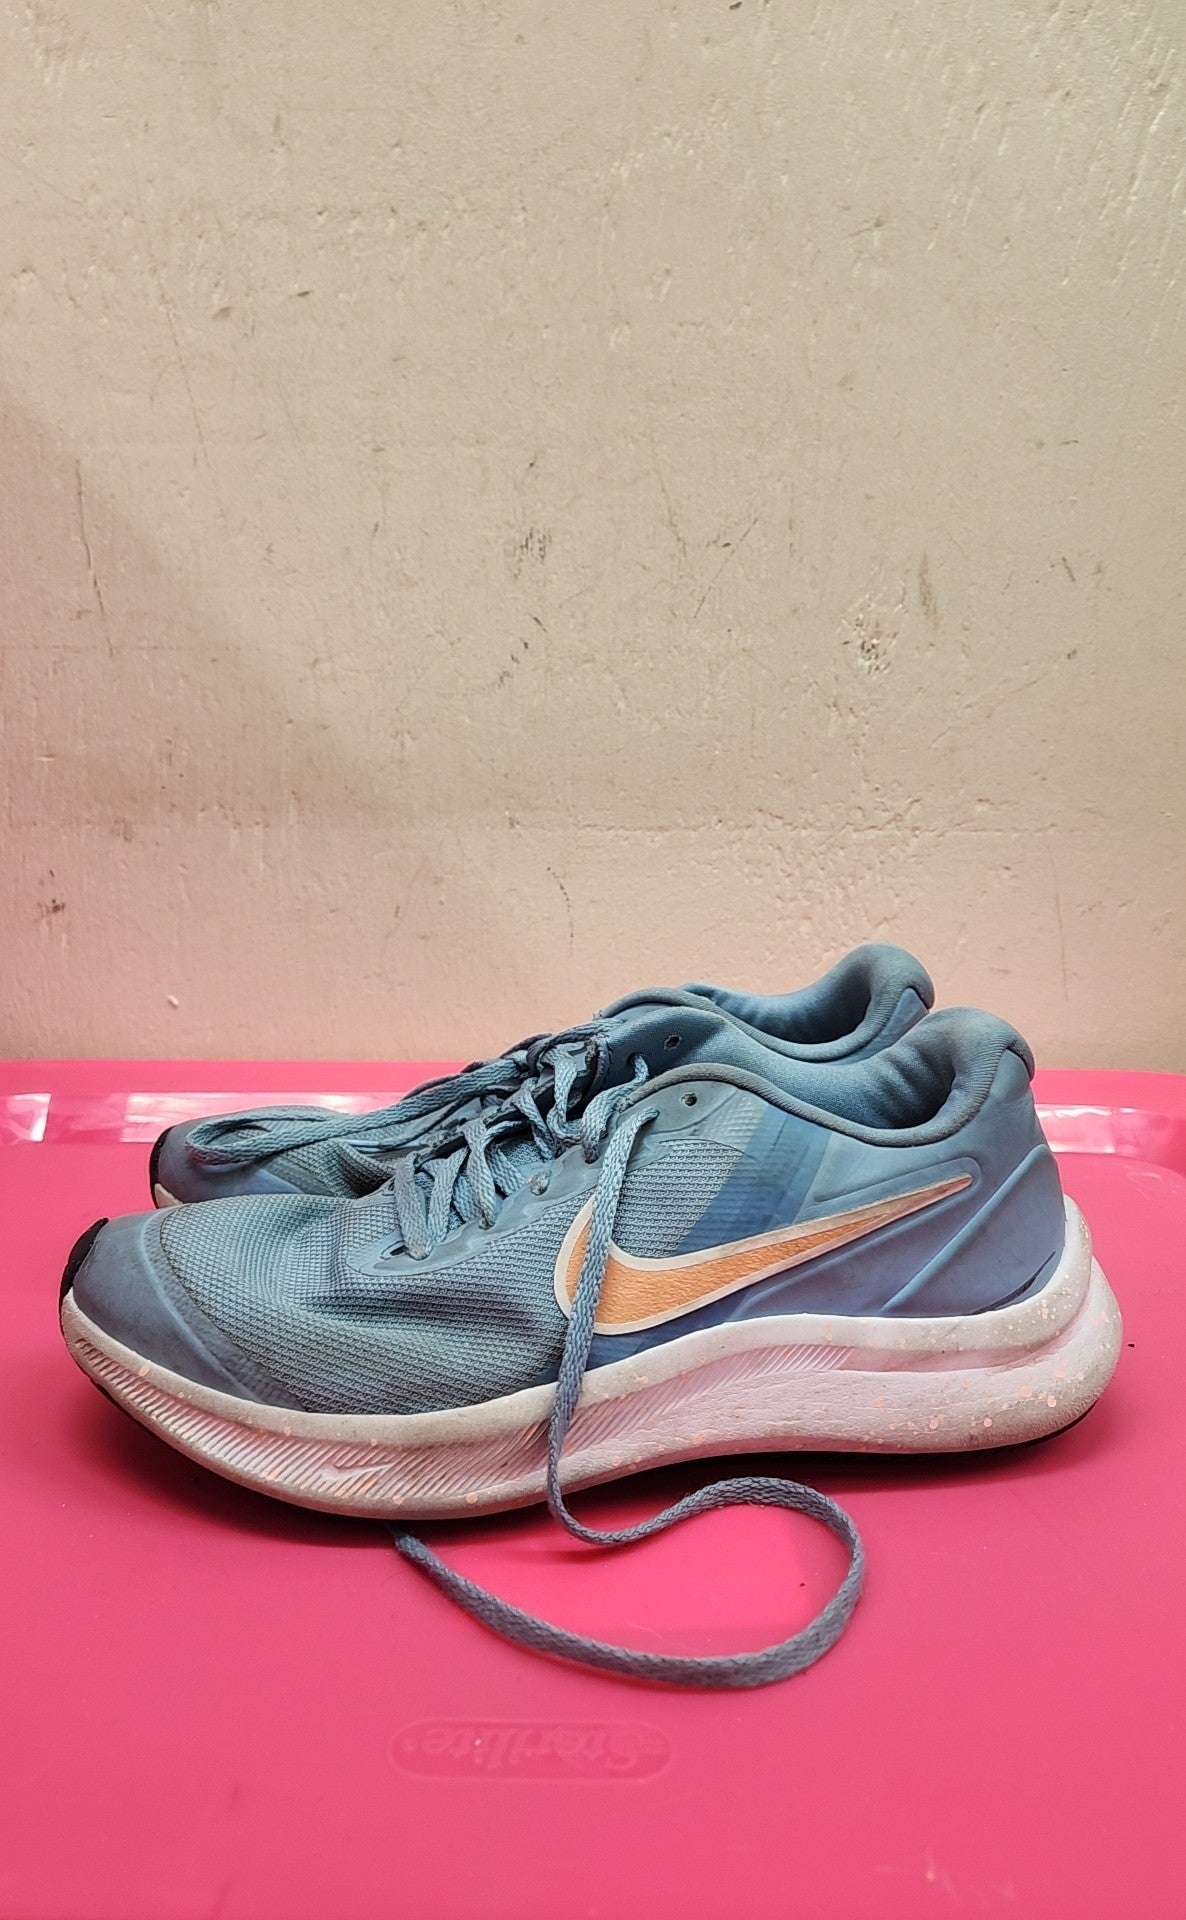 Nike Girl's Size 5 Turquoise Sneakers